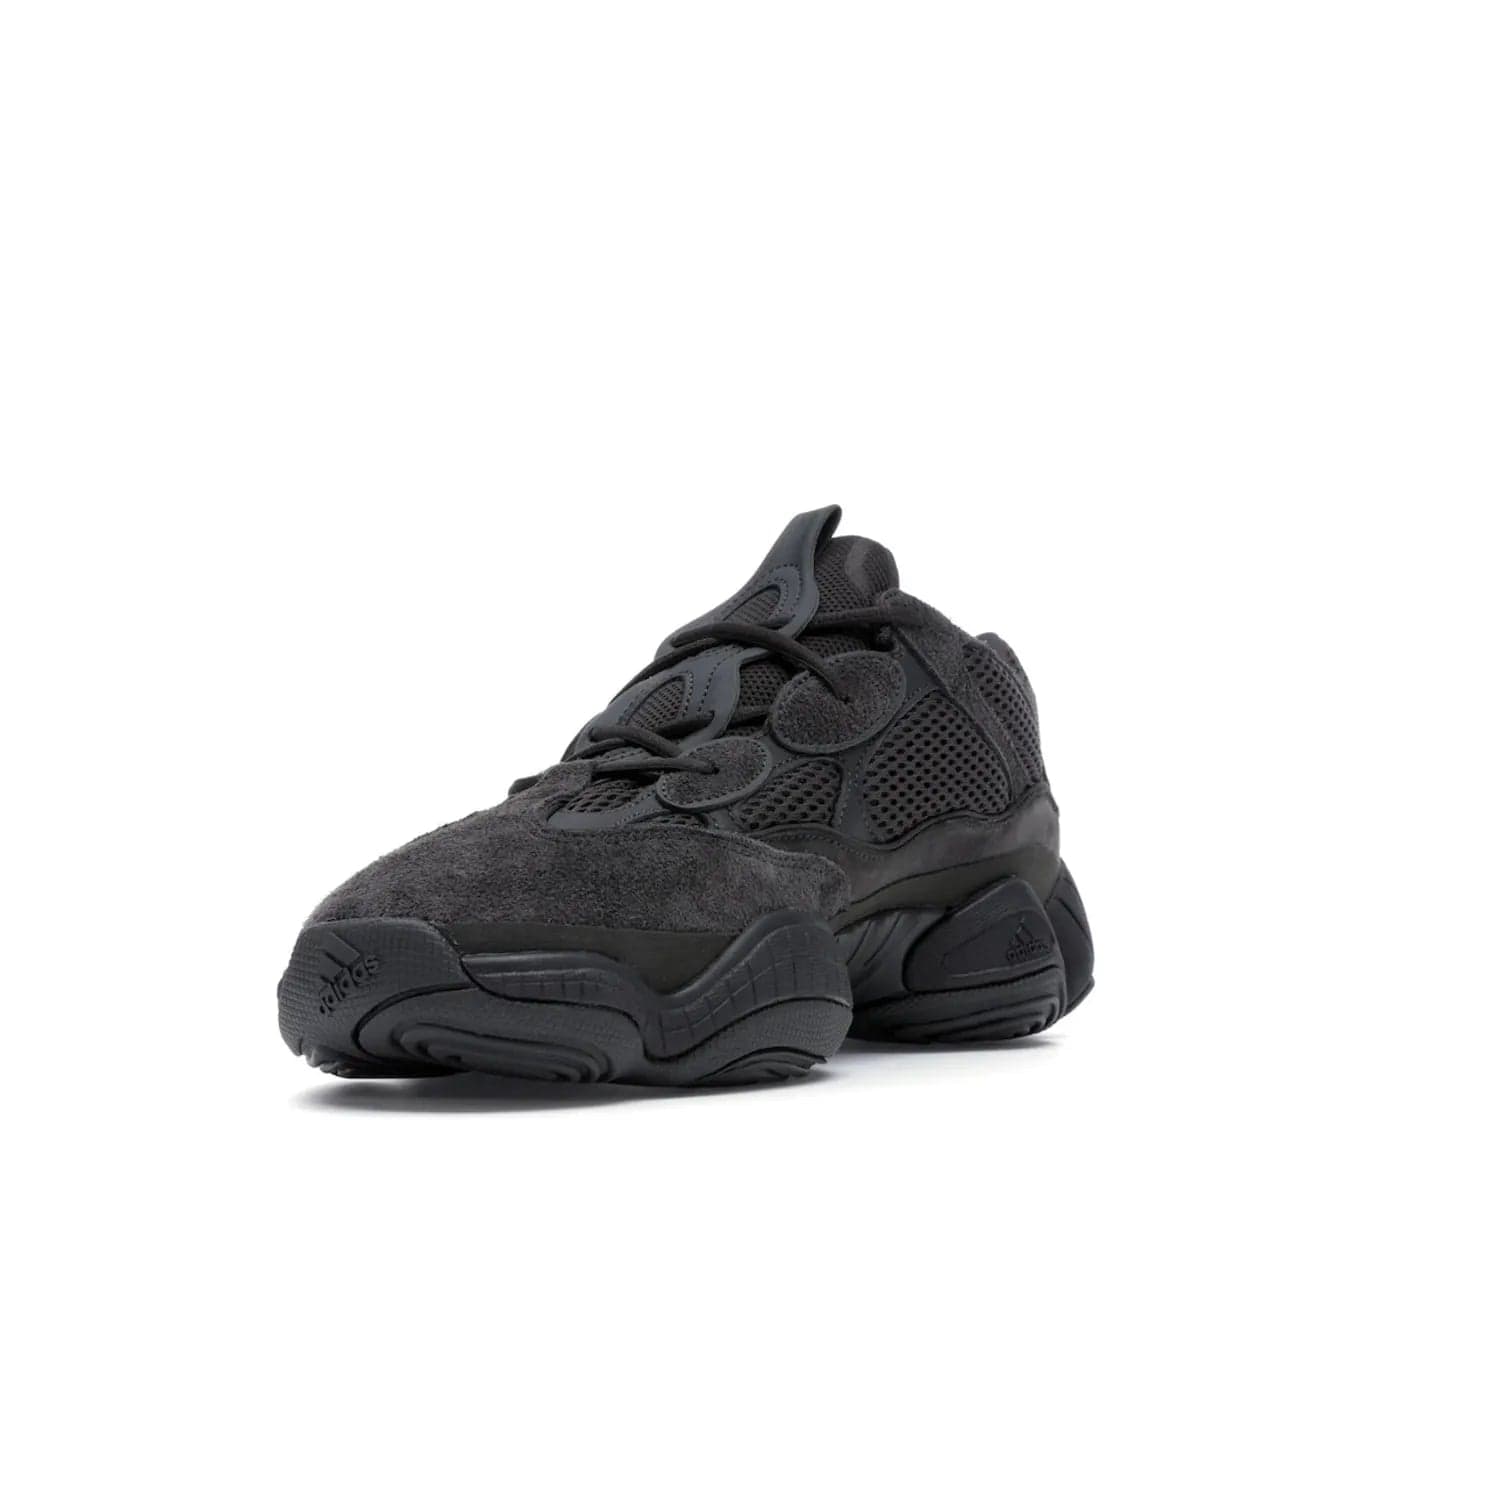 adidas Yeezy 500 Utility Black - Image 14 - Only at www.BallersClubKickz.com - Iconic adidas Yeezy 500 Utility Black in All-Black colorway. Durable black mesh and suede upper with adiPRENE® sole delivers comfort and support. Be unstoppable with the Yeezy 500 Utility Black. Released July 2018.